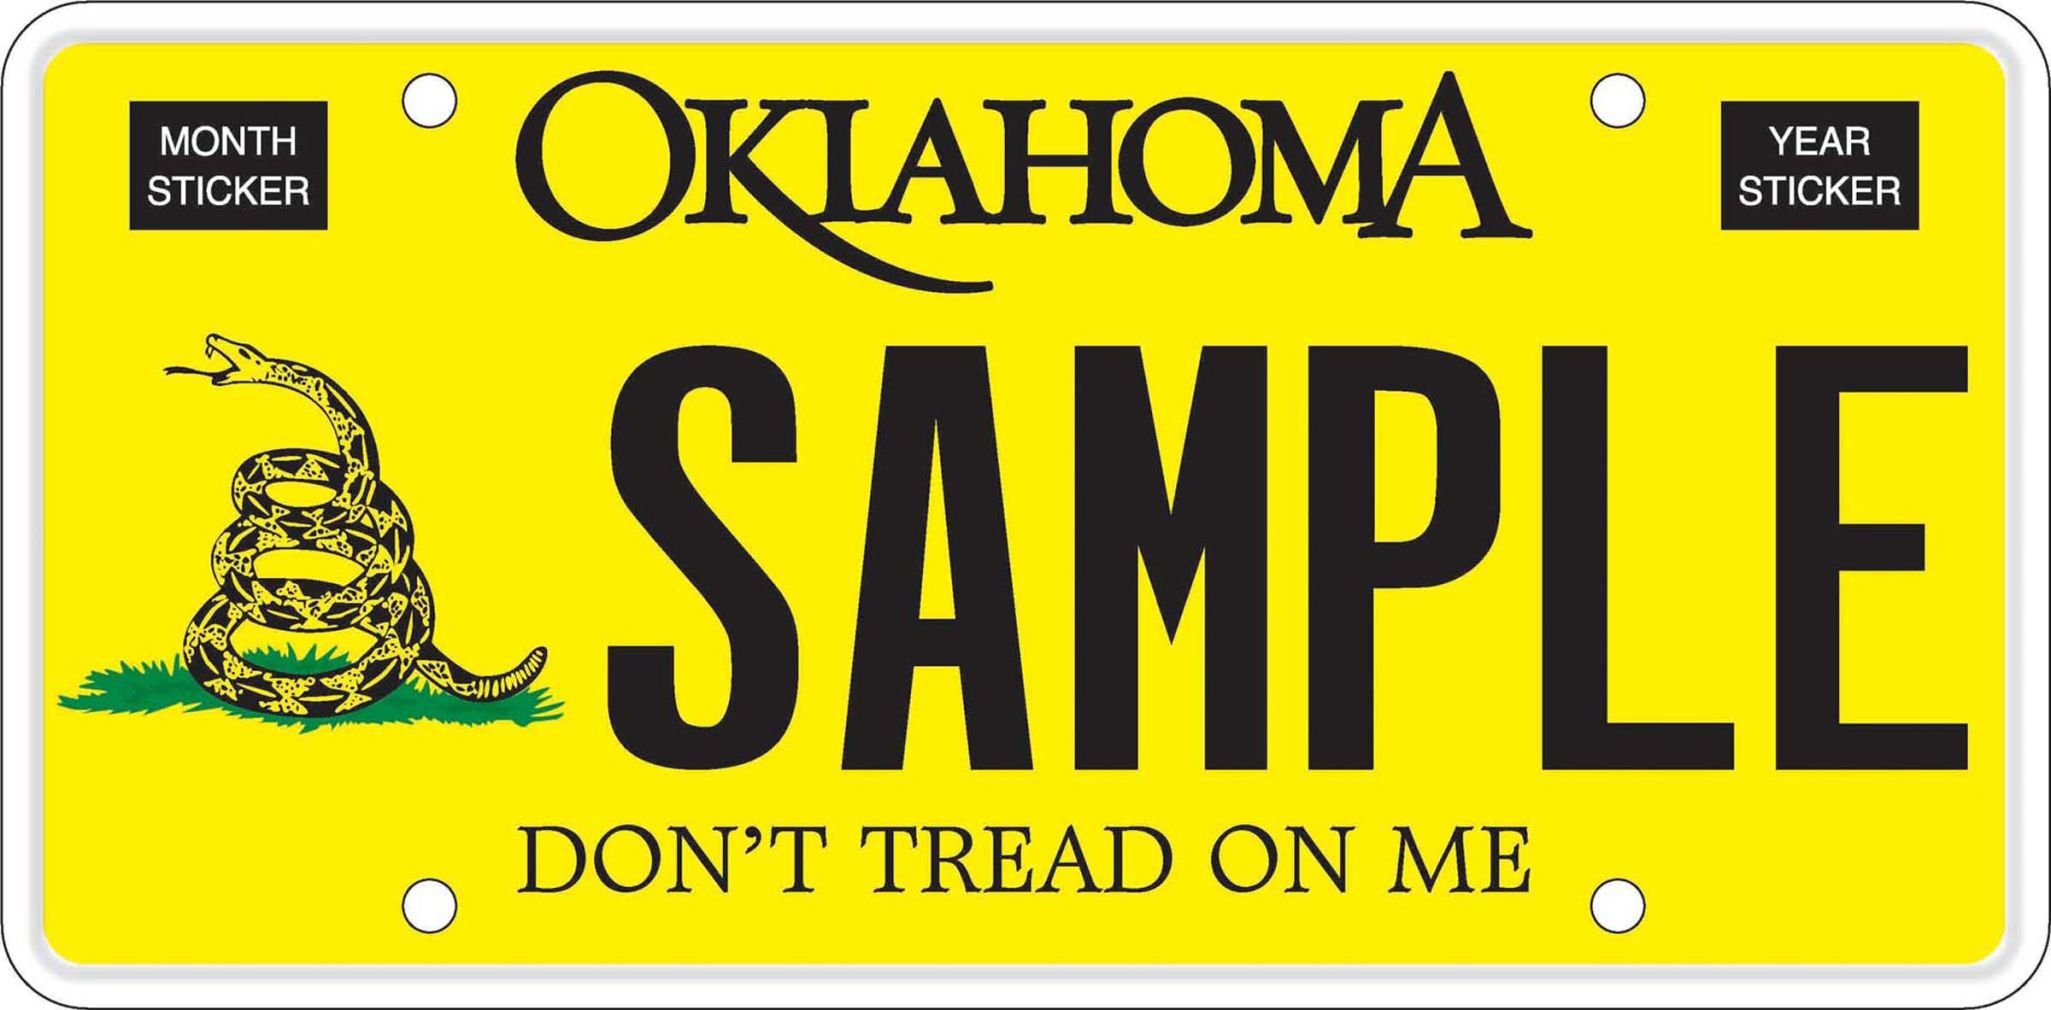 oklahoma personalized motorcycle license plates